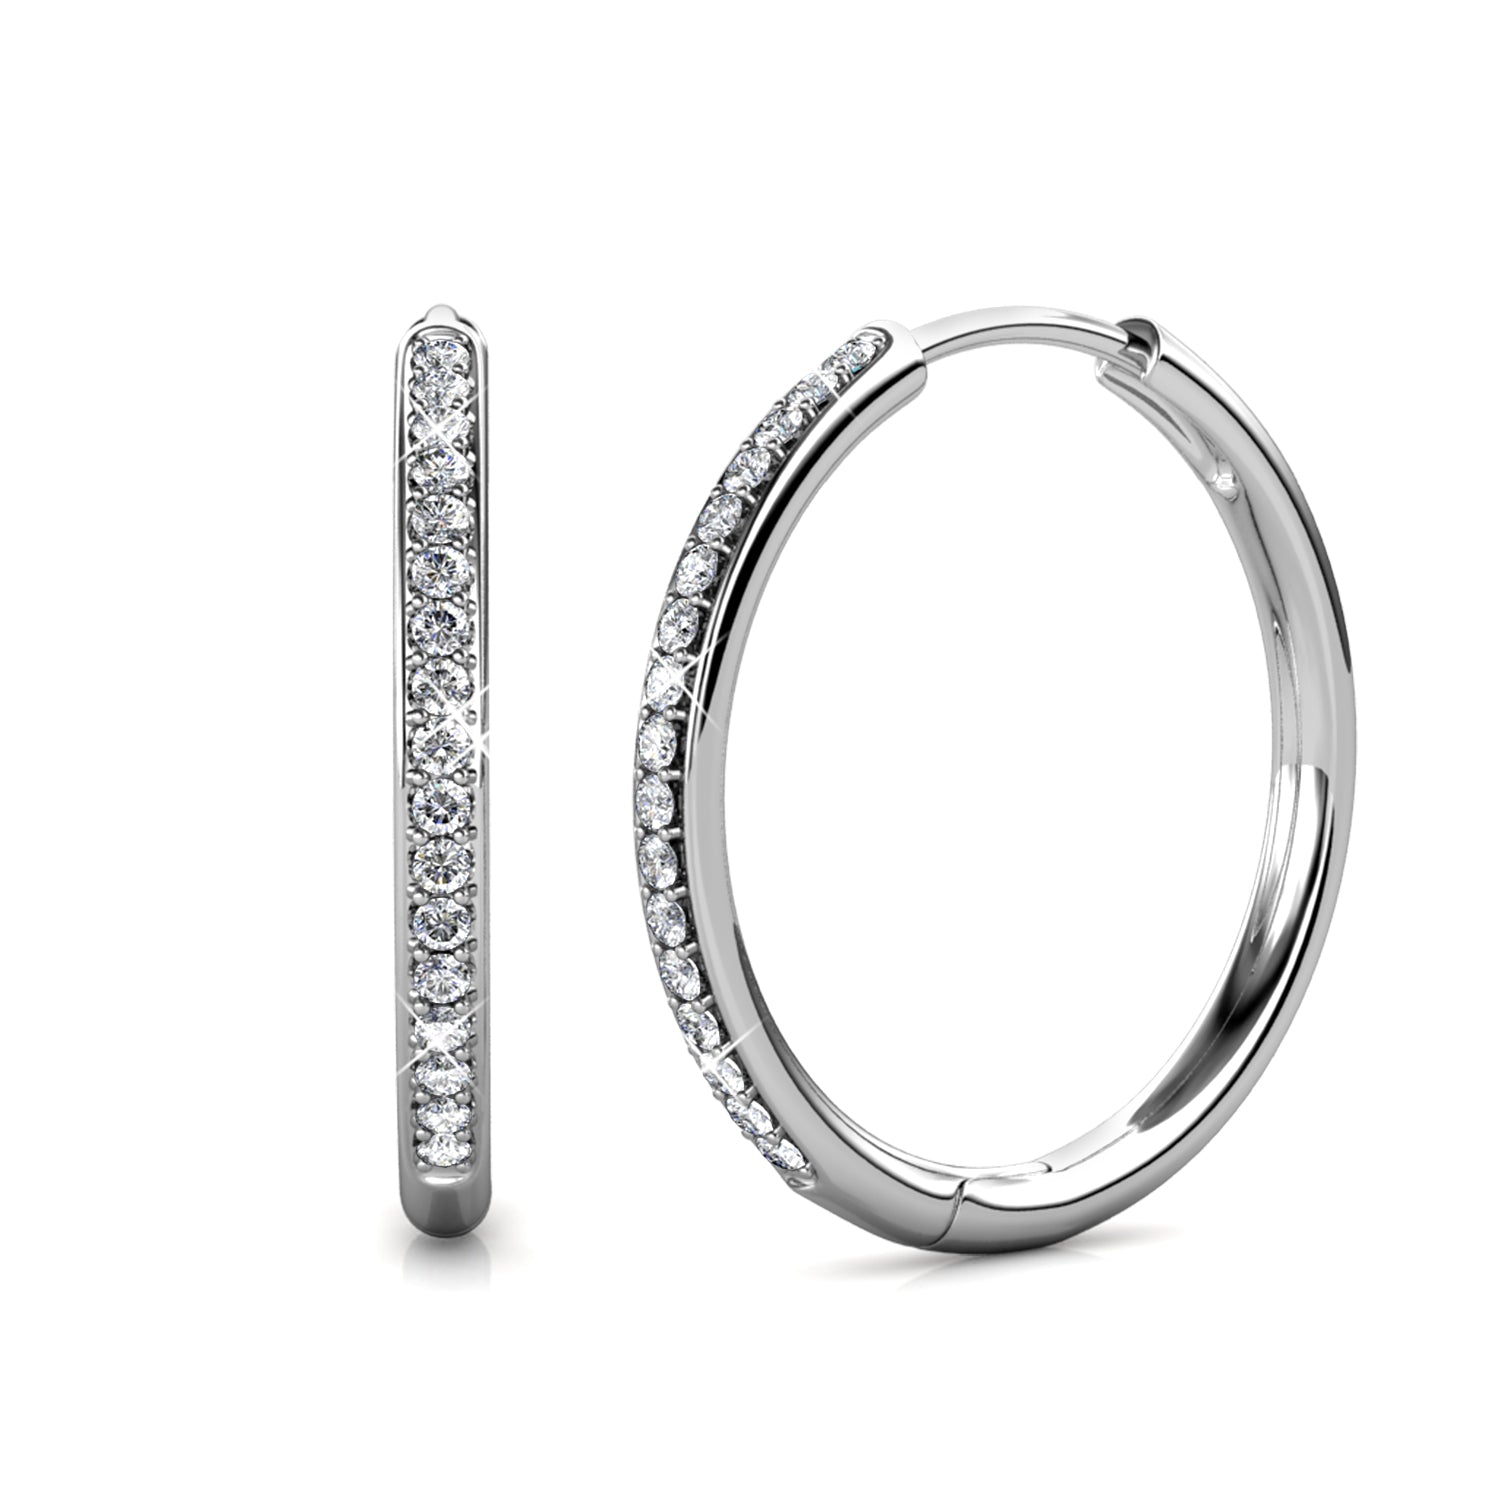 Bianca 18k White Gold Plated Silver Hoop Earrings with Simulated Diamond Crystals